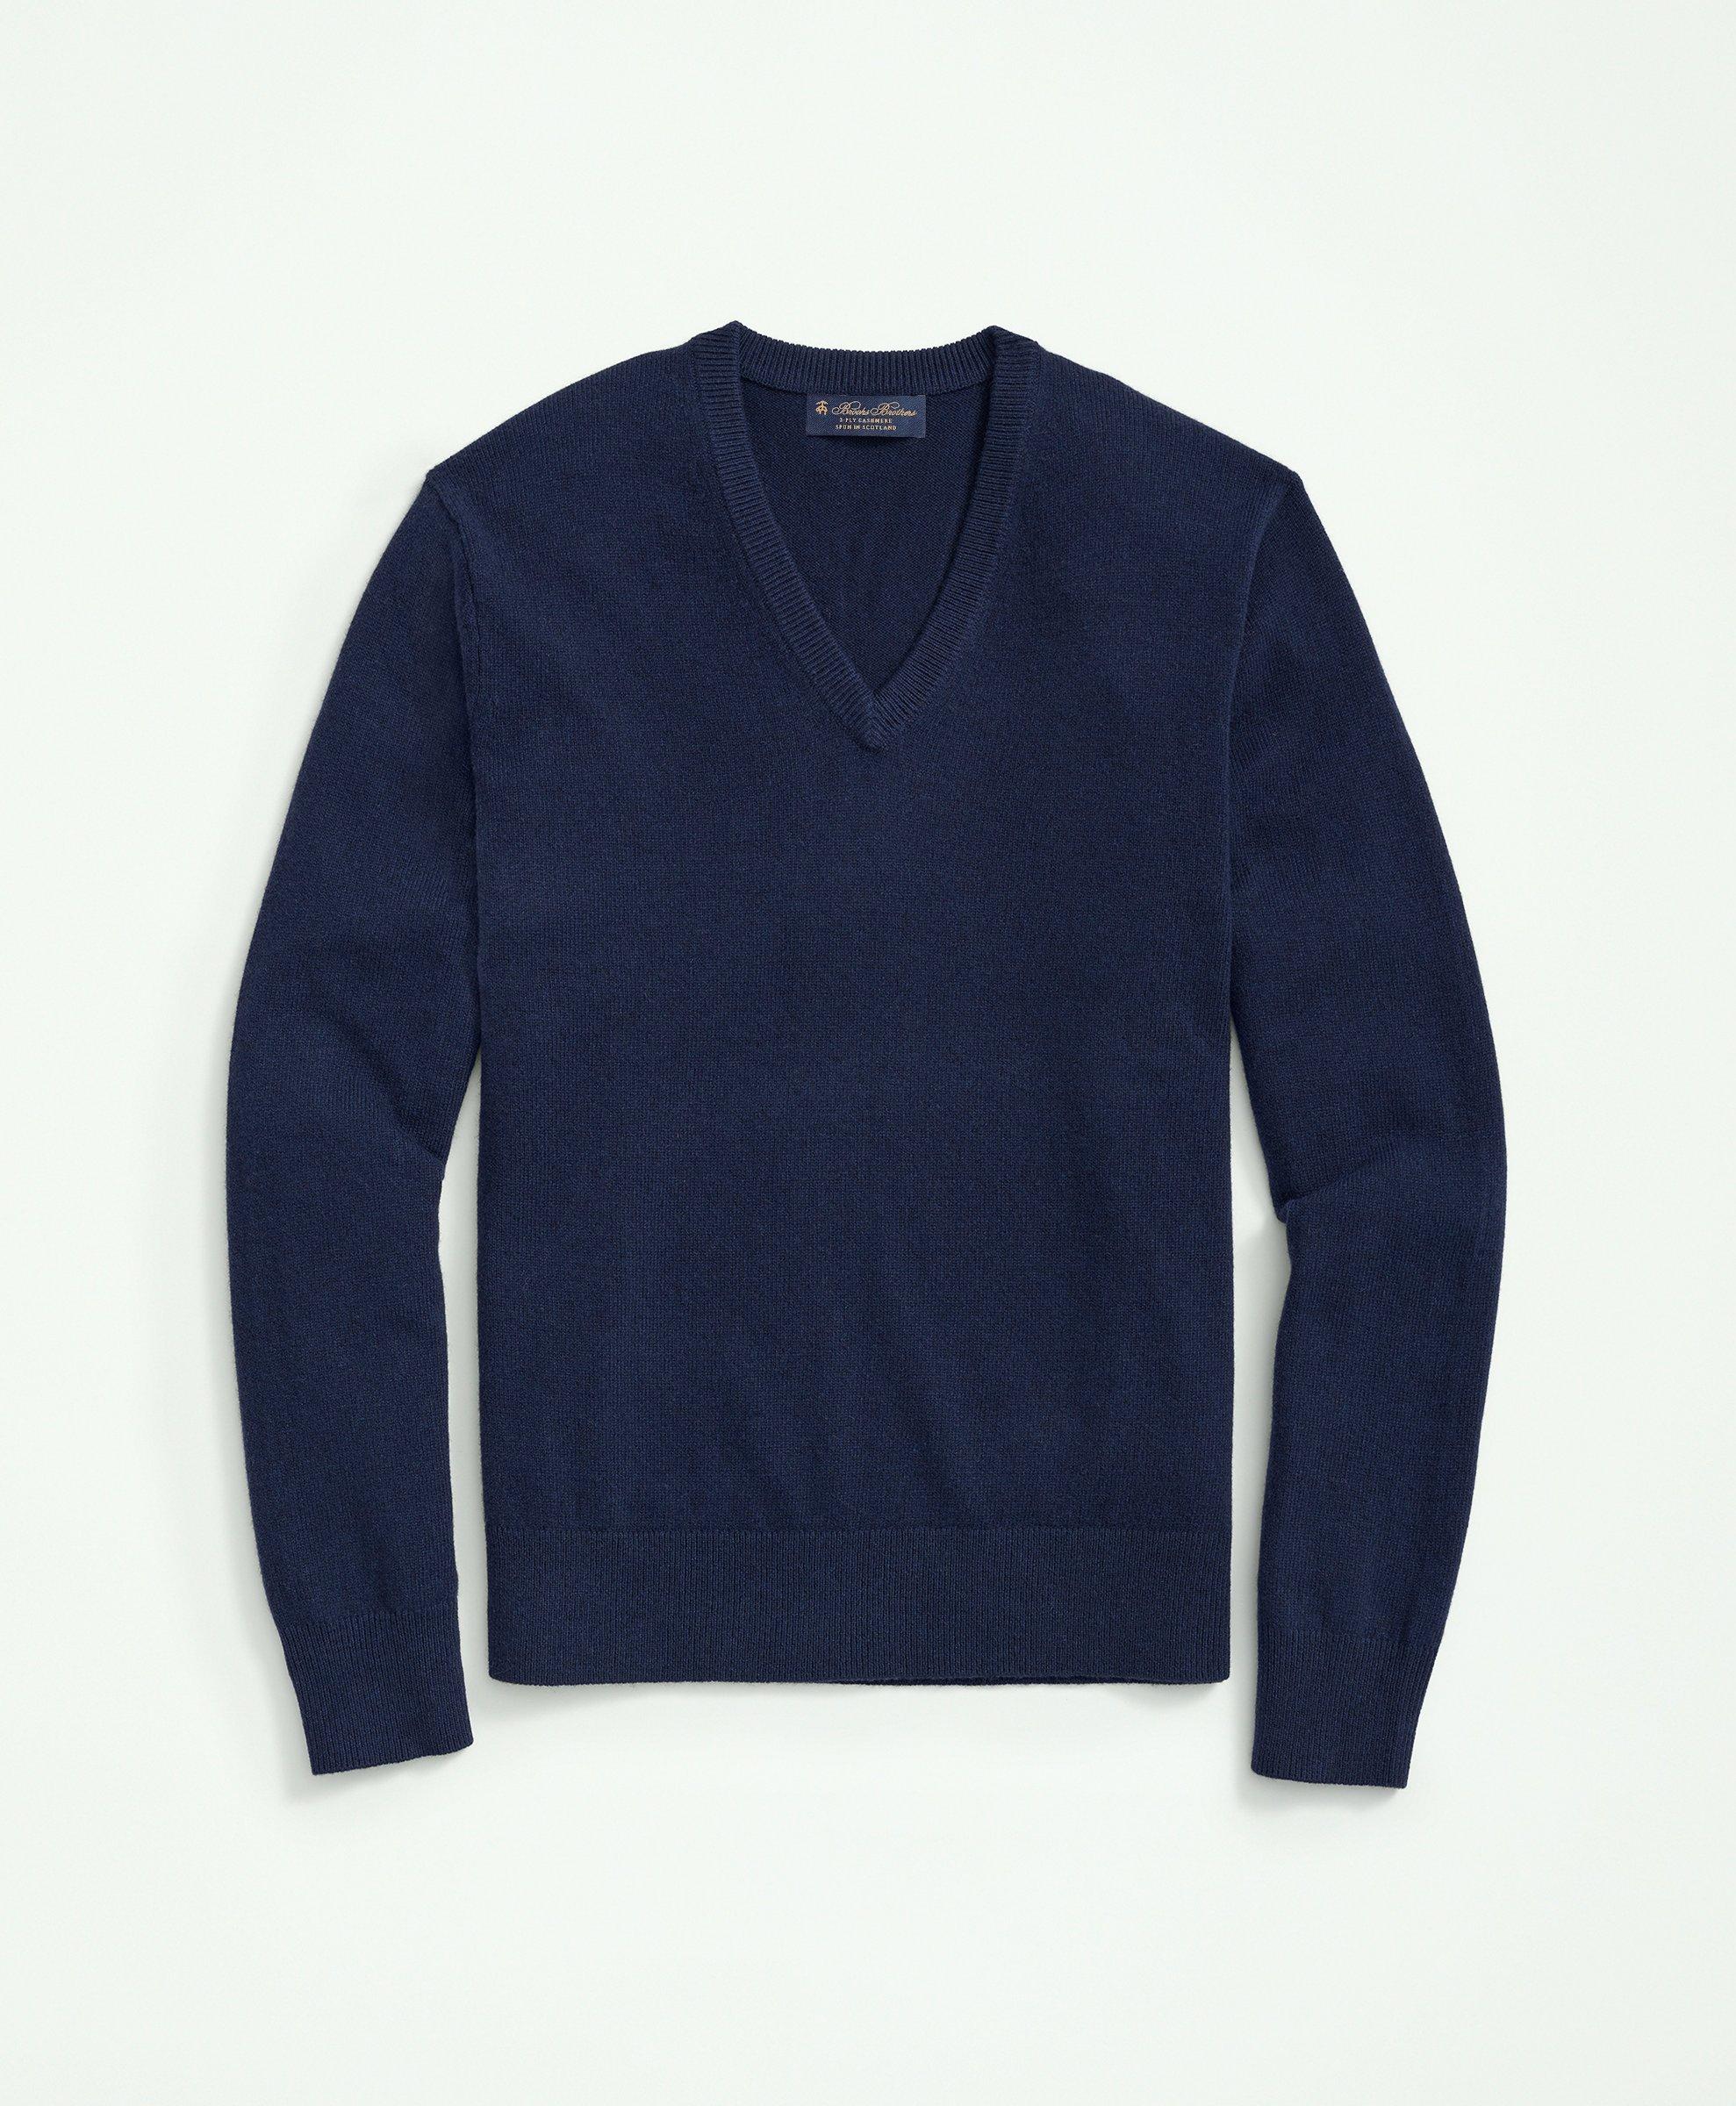 Big & Tall 3-Ply Cashmere V-Neck Sweater, image 1